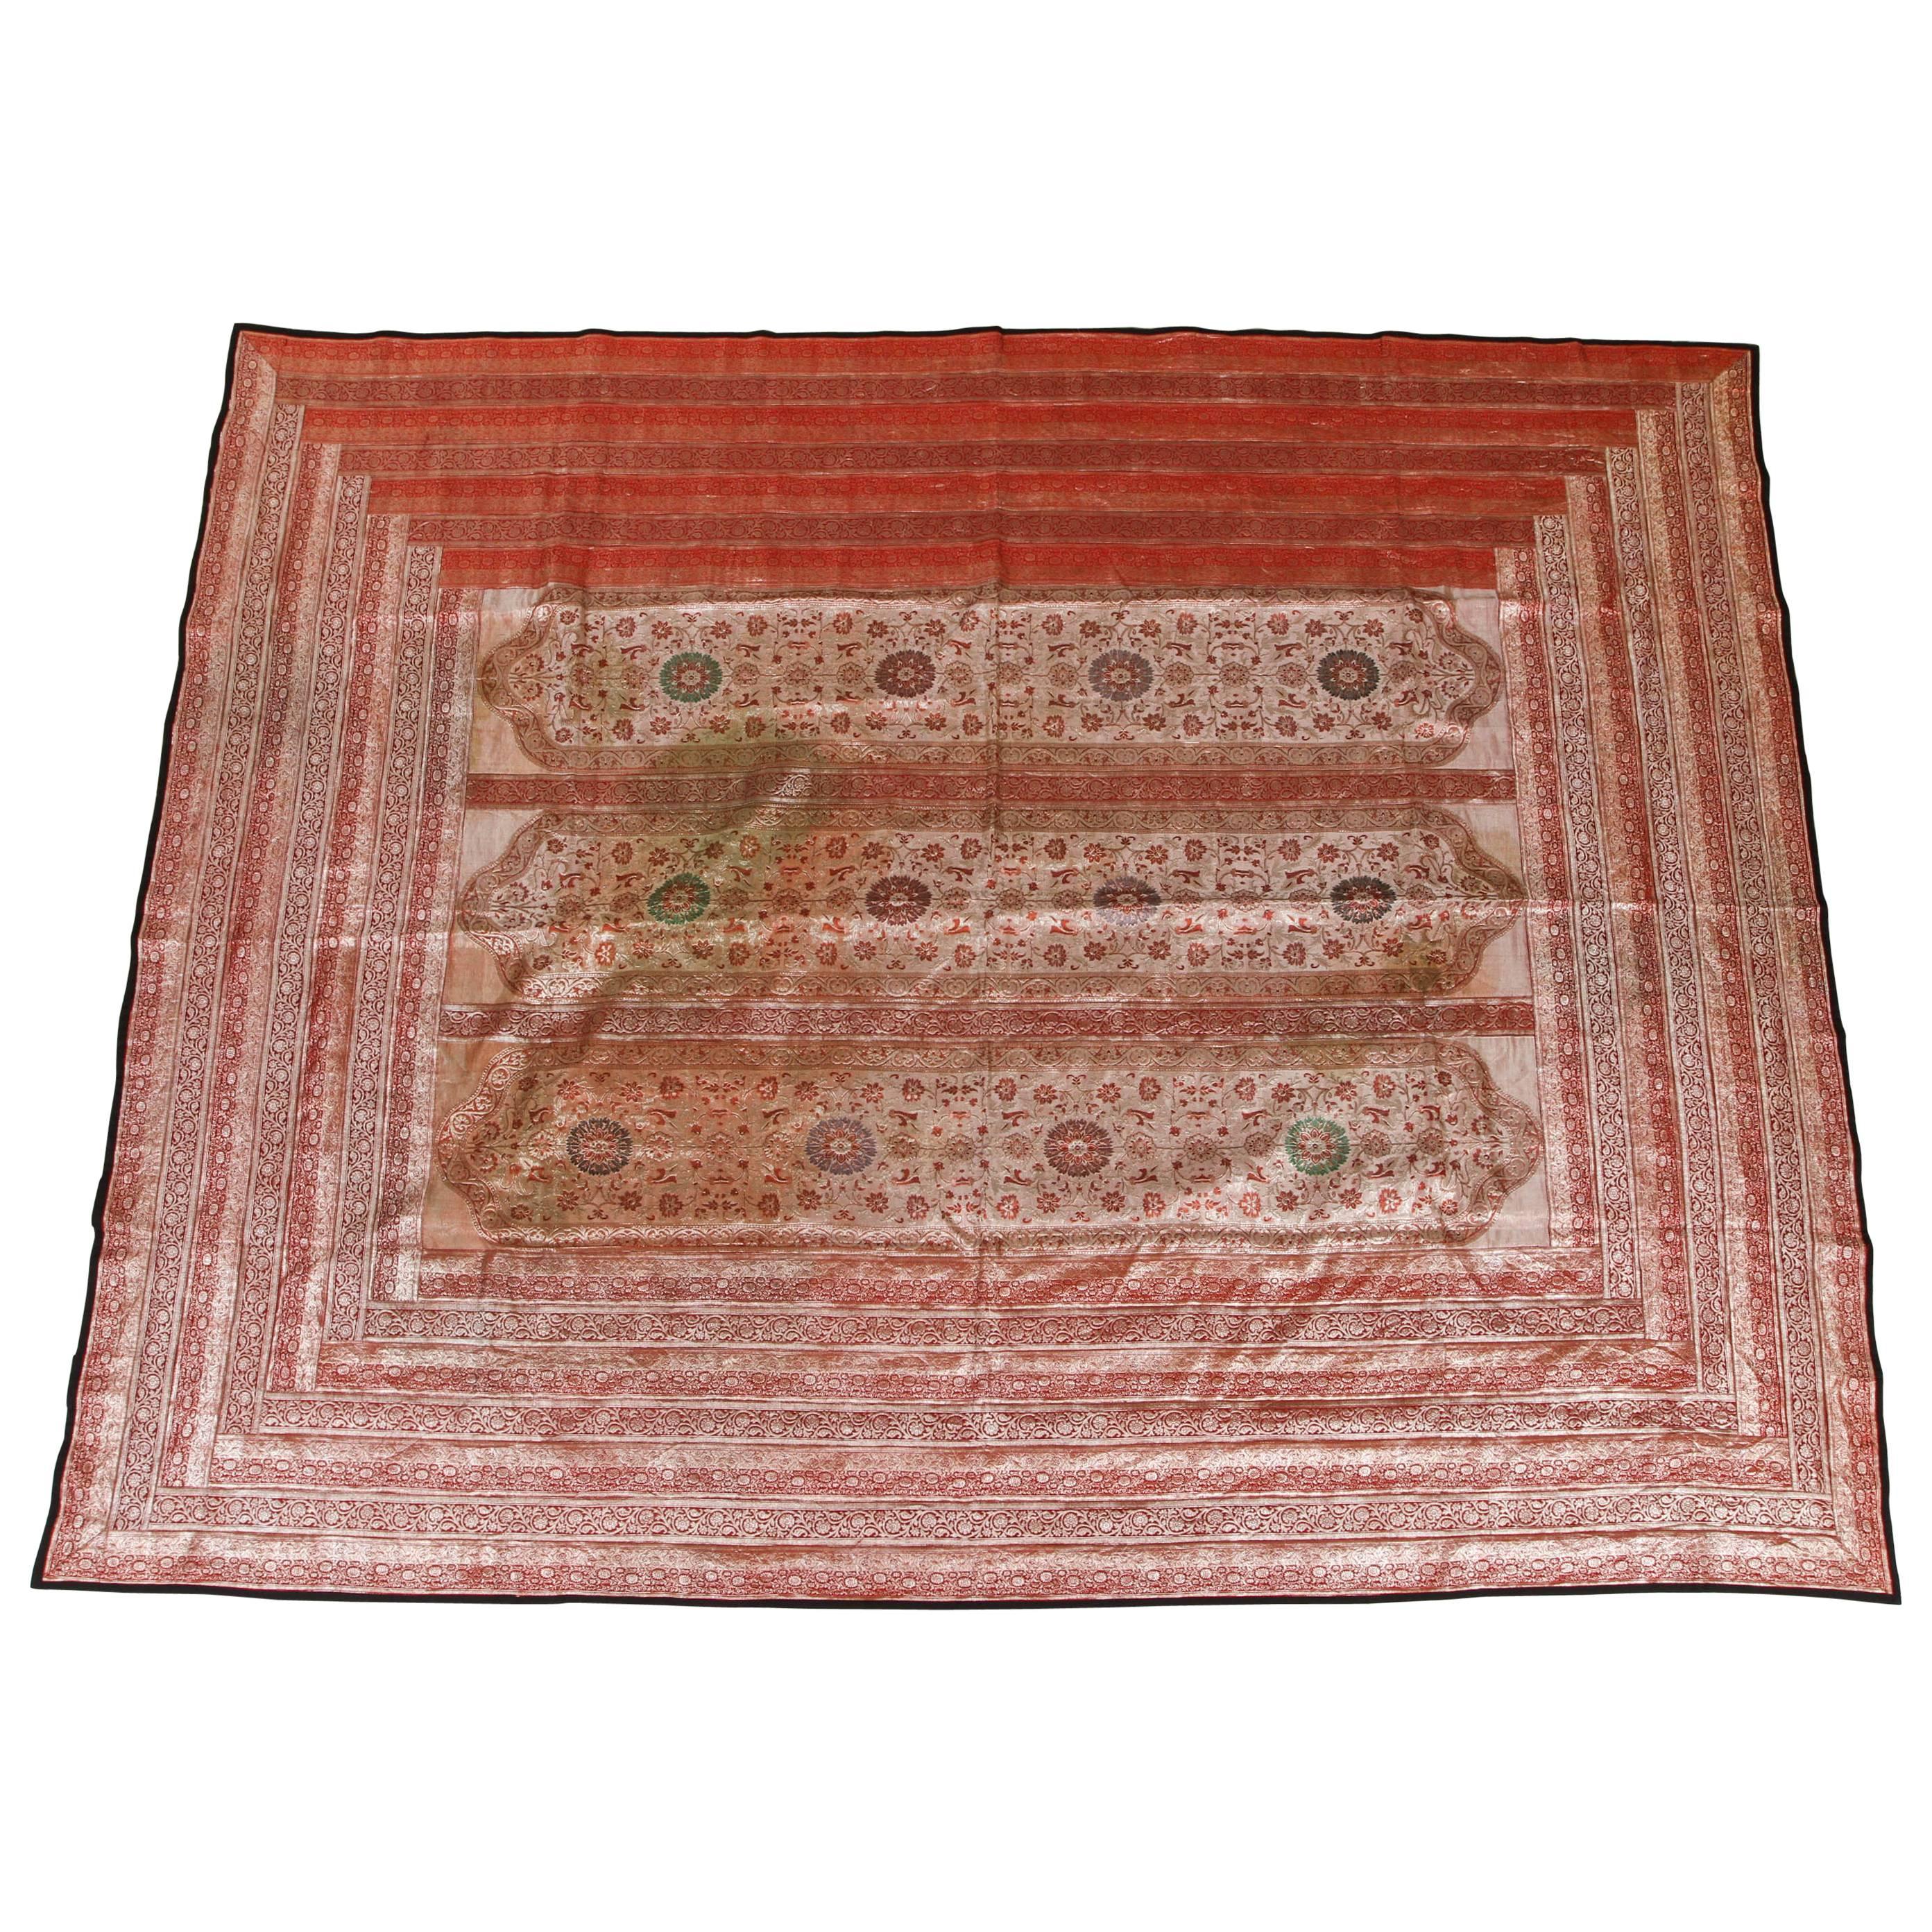 Indian silk sari tapestry quilt patchwork.
Nice red lame silk fabric with Moorish Moroccan style arches.
Lined with black fabric,
could be used a a bed cover or hanging on the wall.
All of our textiles are handmade and original designs, the making